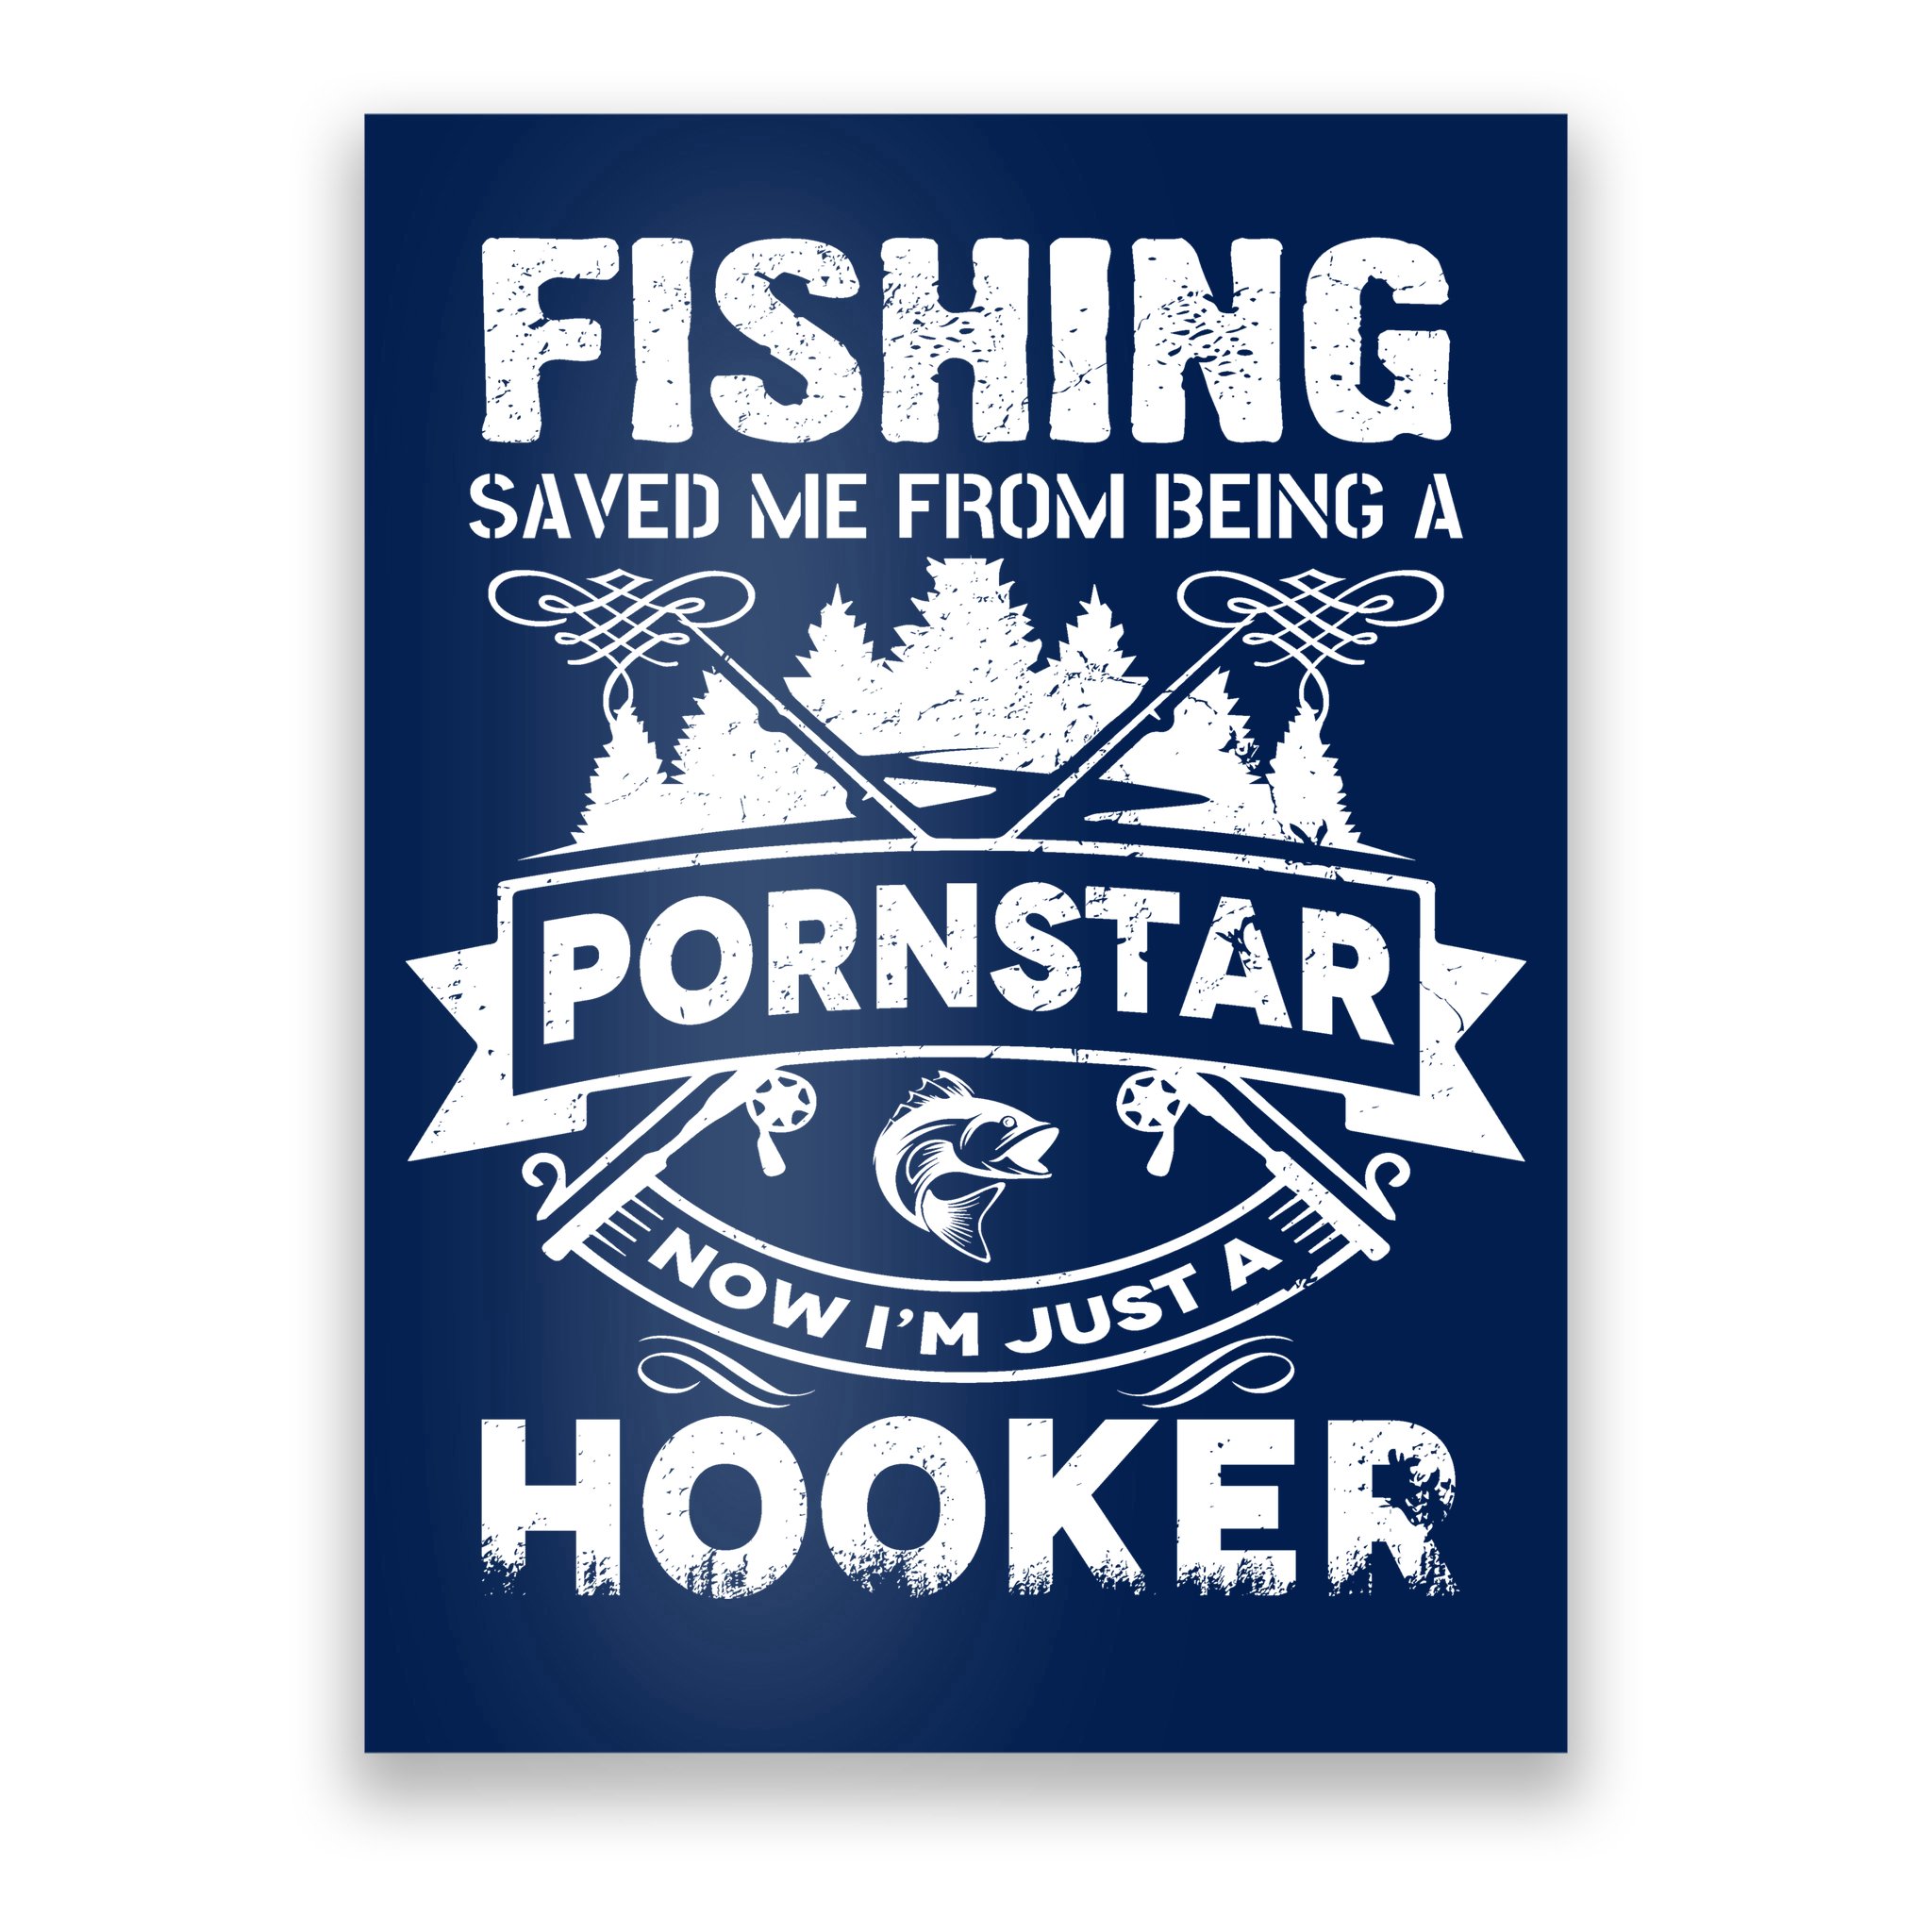 Fishing Saved Me From Being A Pornstar Now I'm Just A Hooker Poster